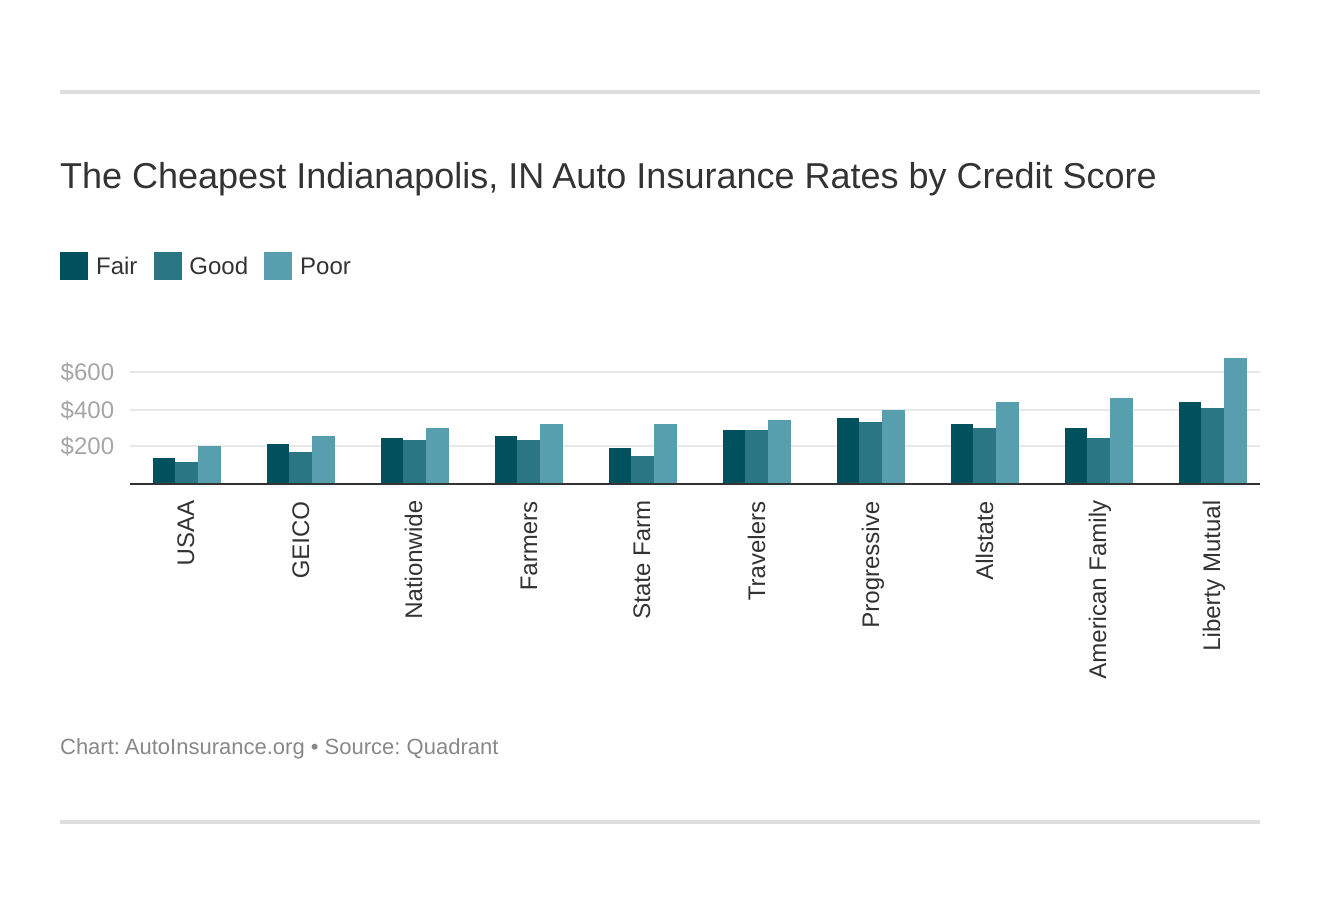 The Cheapest Indianapolis, IN Auto Insurance Rates by Credit Score